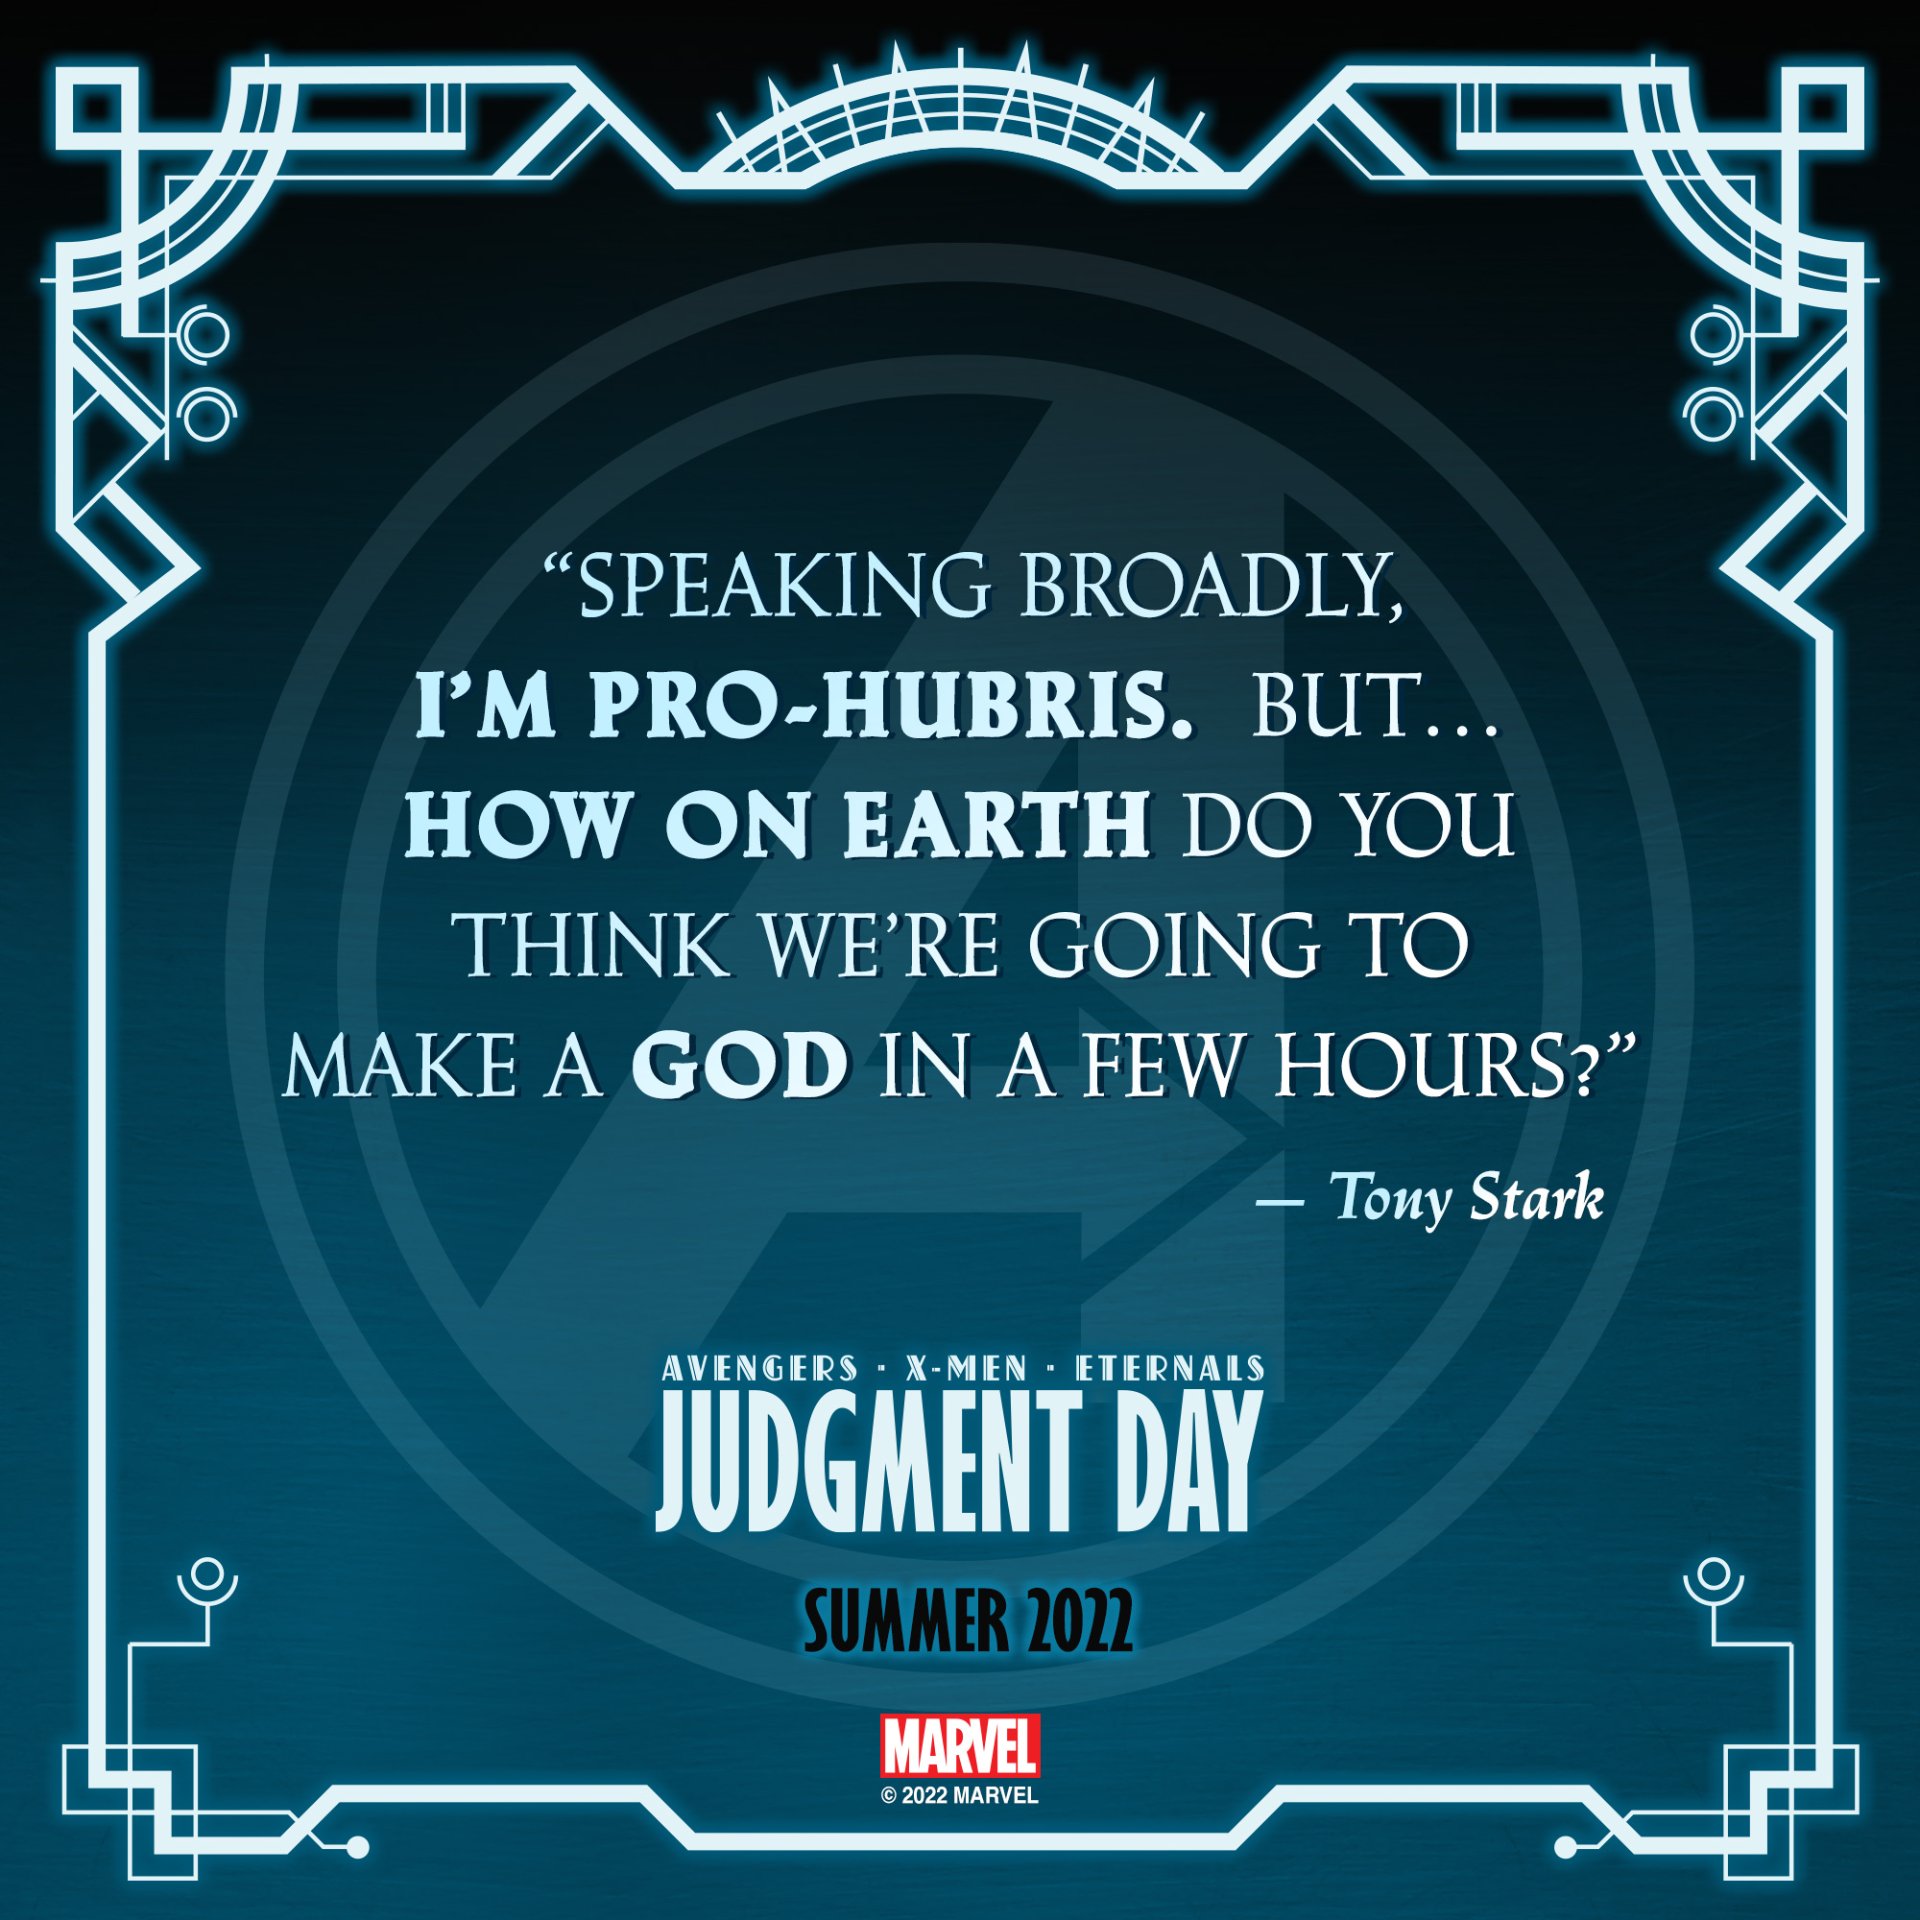 Judgment Day teasers